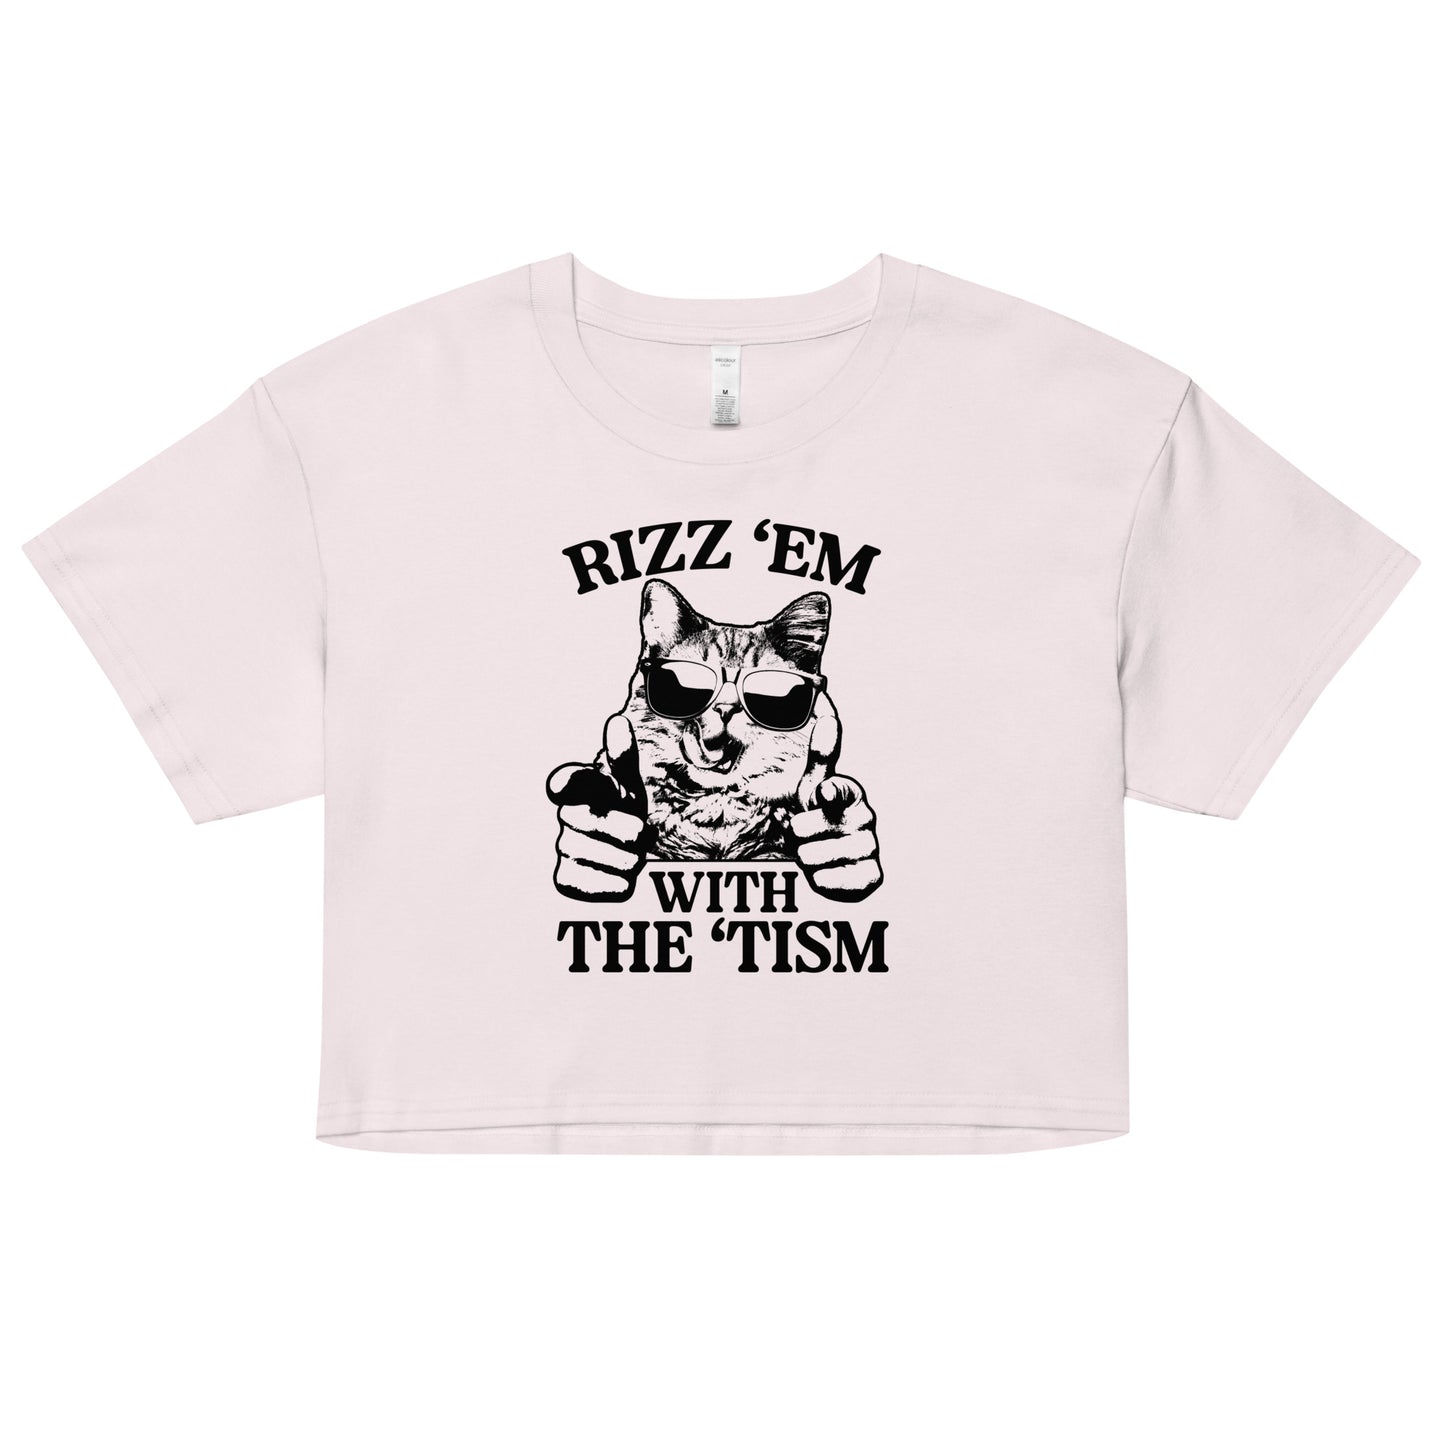 Rizz 'Em With the 'Tism (Cat) crop top